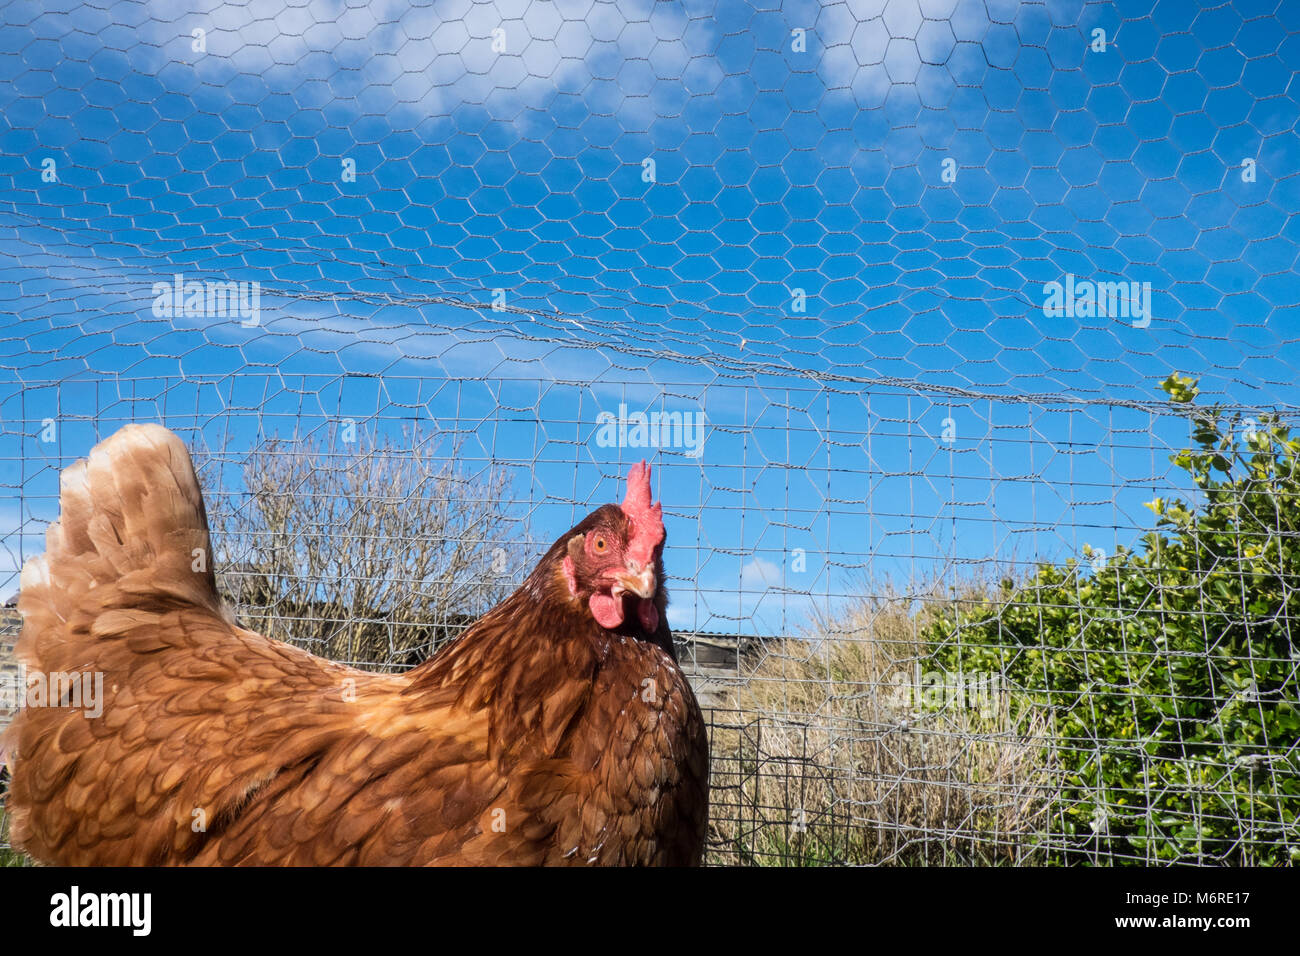 Llansaint, Carmarthenshire, Wales, UK. 6th March, 2018. UK Weather: Backyarden garden chicken hens having endured recent freezing conditions out in the sun. Today basking in the sun with, more spring conditions, temperatures of 7 degrees centigrade in village of Llansaint,Carmarthenshire,Wales U.K.The brown hens are Warren breed and white one is Light Sussex.Part of a small flock of 7 birds.Model and property released as the birds are my property as is the garden. Credit: Paul Quayle/Alamy Live News Stock Photo